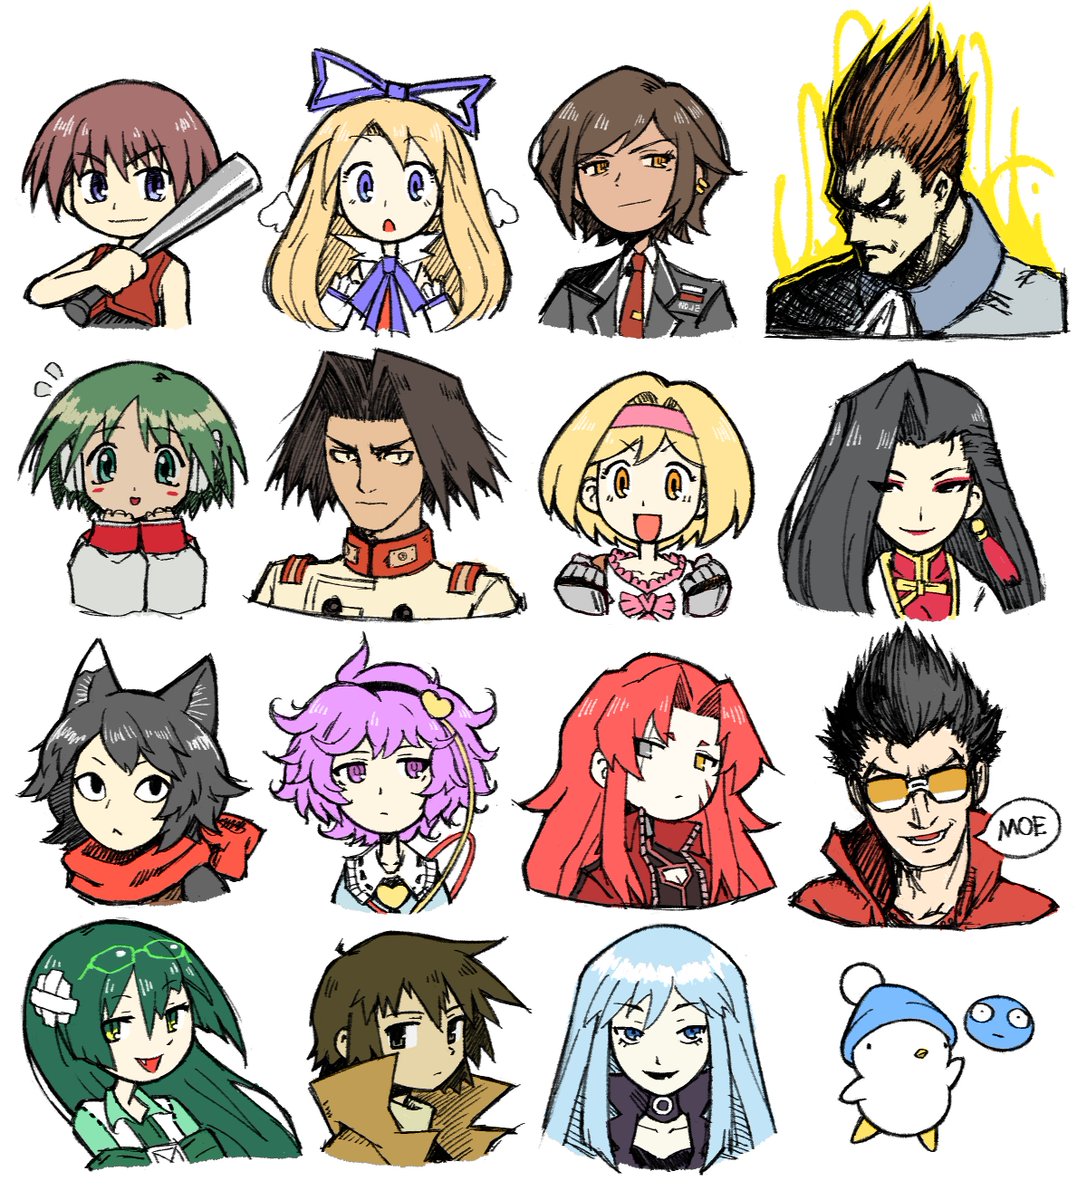 this took longer than I thought it would cuz I drew more characters than I planned. anyway it was fun